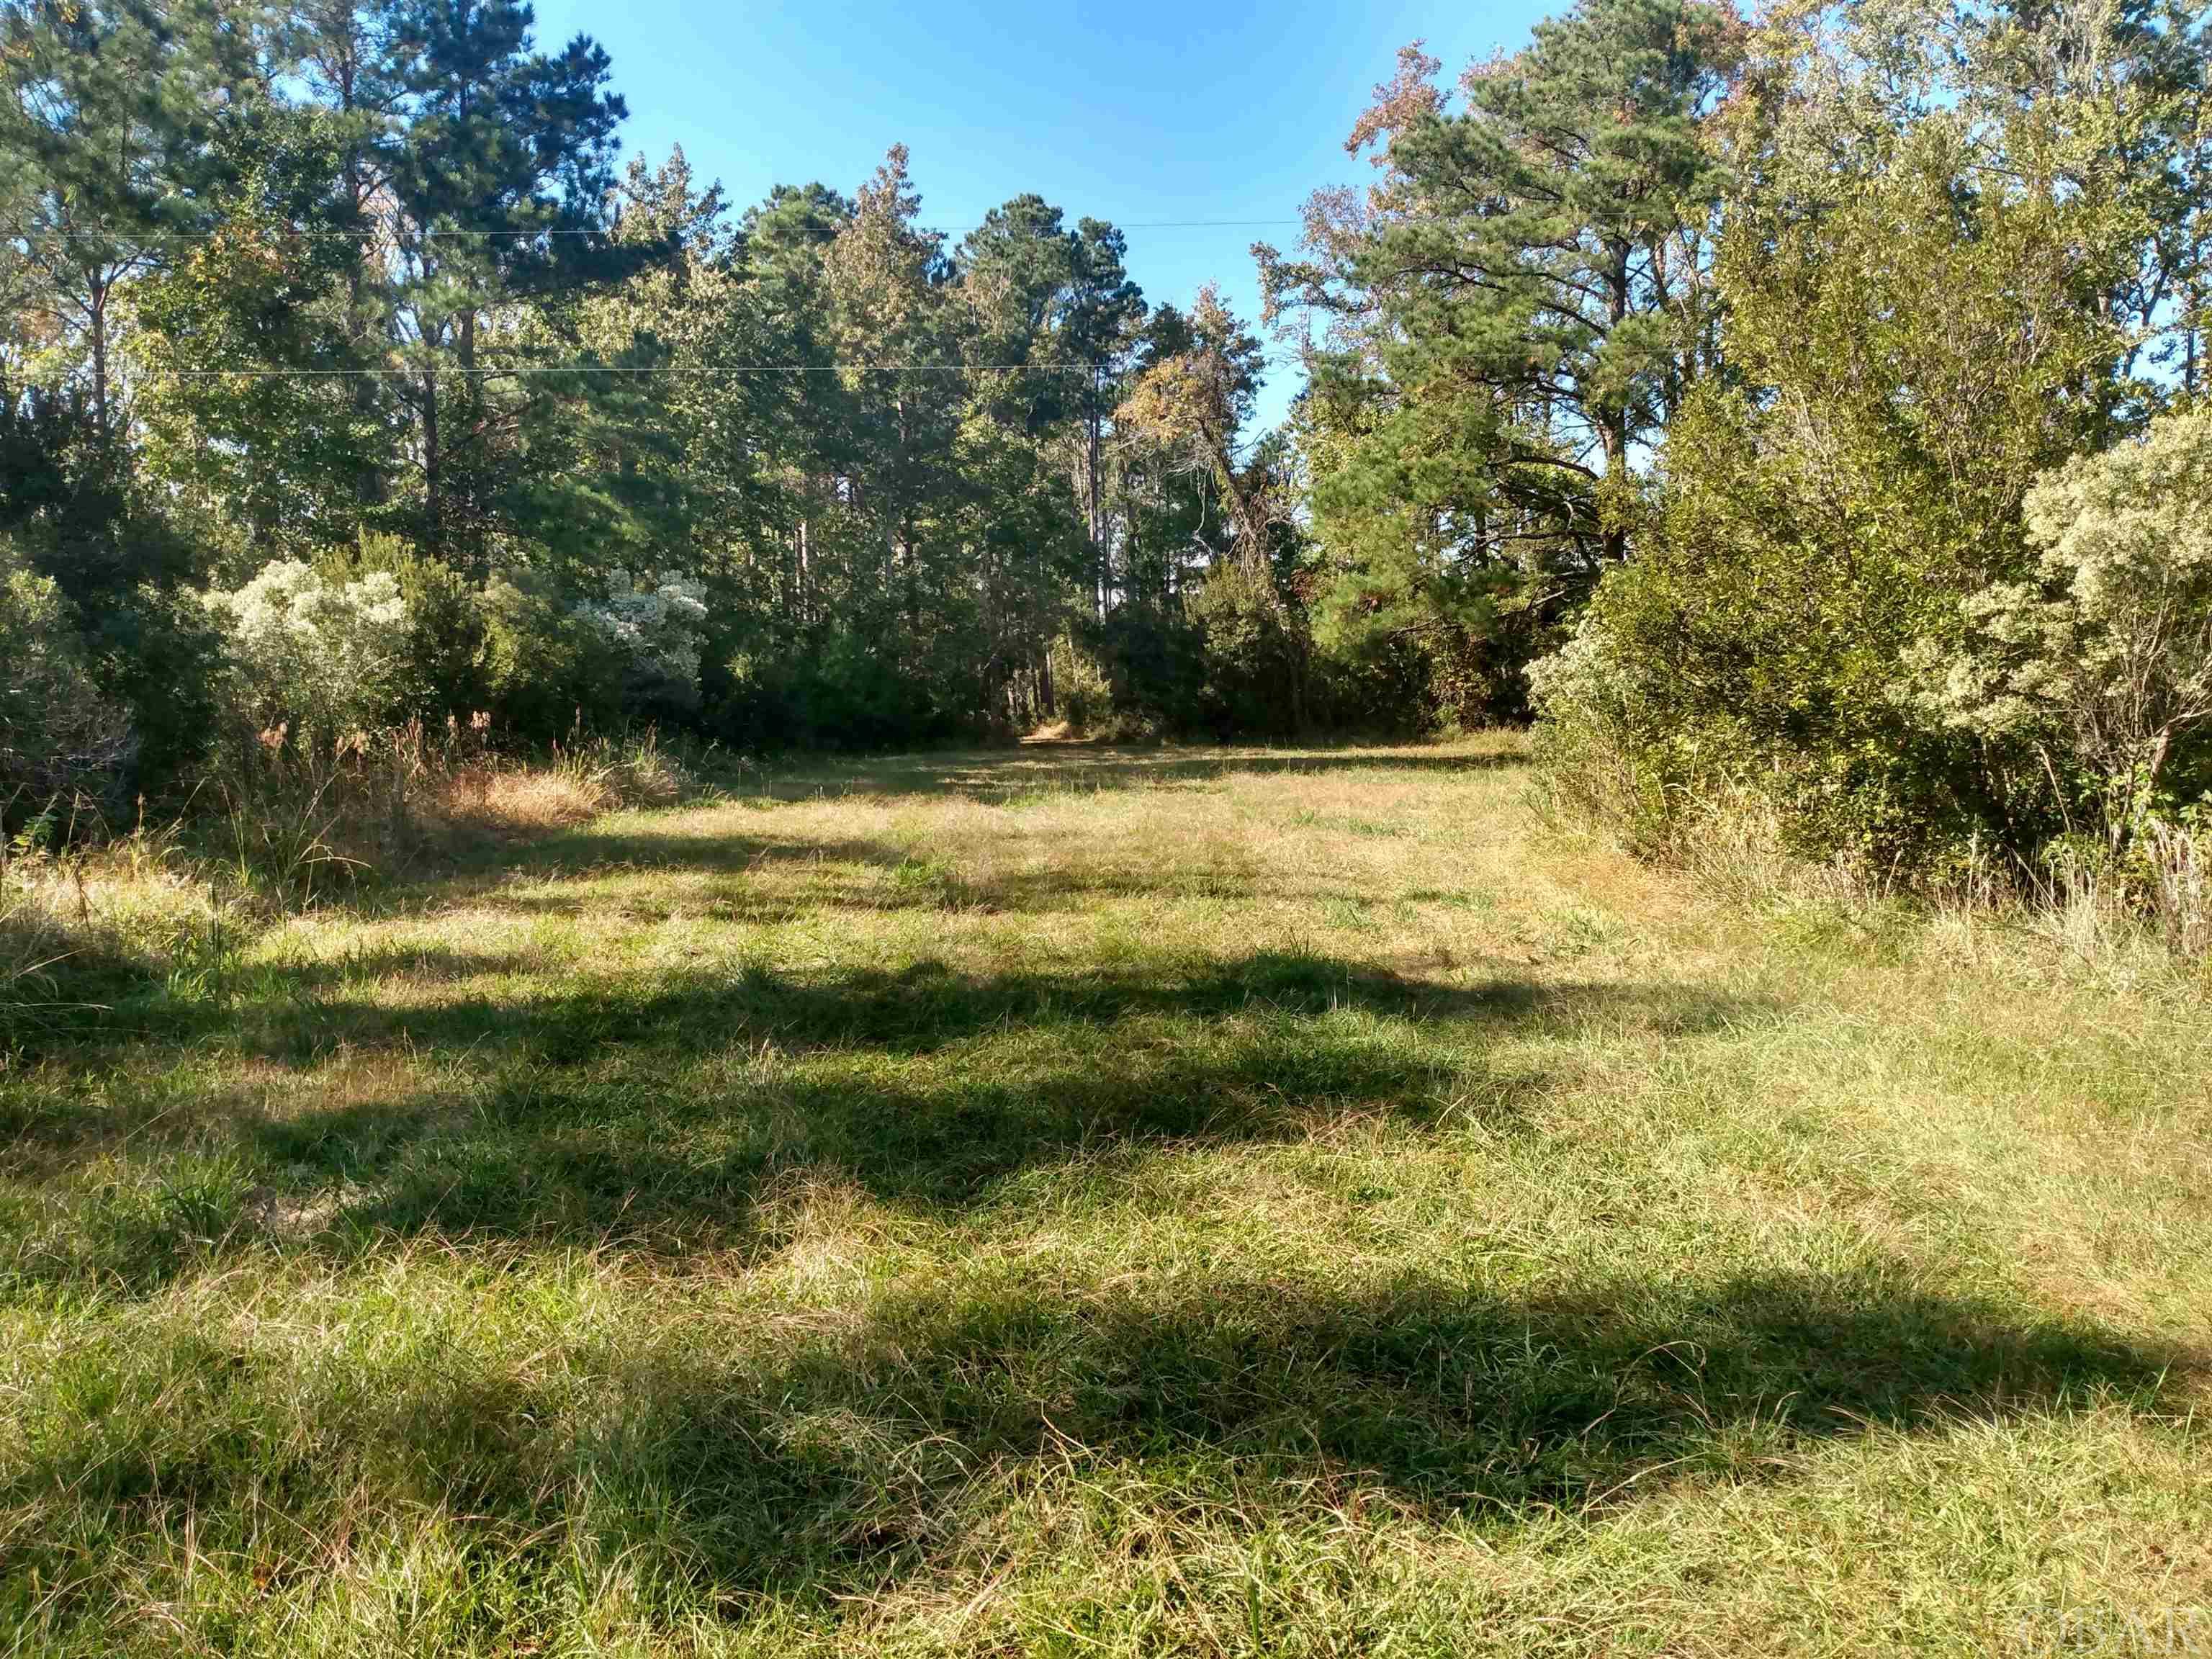 This wooded 5+/- acres tract is located in the Goat Neck Community of Tyrrell County, N.C. The road frontage of this property is the site of an old home destroyed by fire and is believed to have county water supply and a septic system on the property. No HOA, no restrictions. Located just 1.6 miles from the North Carolina Wildlife Resources Commission's "Texas Plantation Game Lands" and the "Palmetto- Peartree Preserve". Within 2.7 miles from an old ferry dock in the Fort Landing Community with a small boat ramp providing access to the abundant marine and wildlife resources of the Alligator Creek and Alligator River. As there are no restrictions a RV or camper could possibly be placed on the property for overnight or weekend stays. There is a small cemetery on the property. Excellent hunting and fishing opportunities in this area! Offered at $18,000.